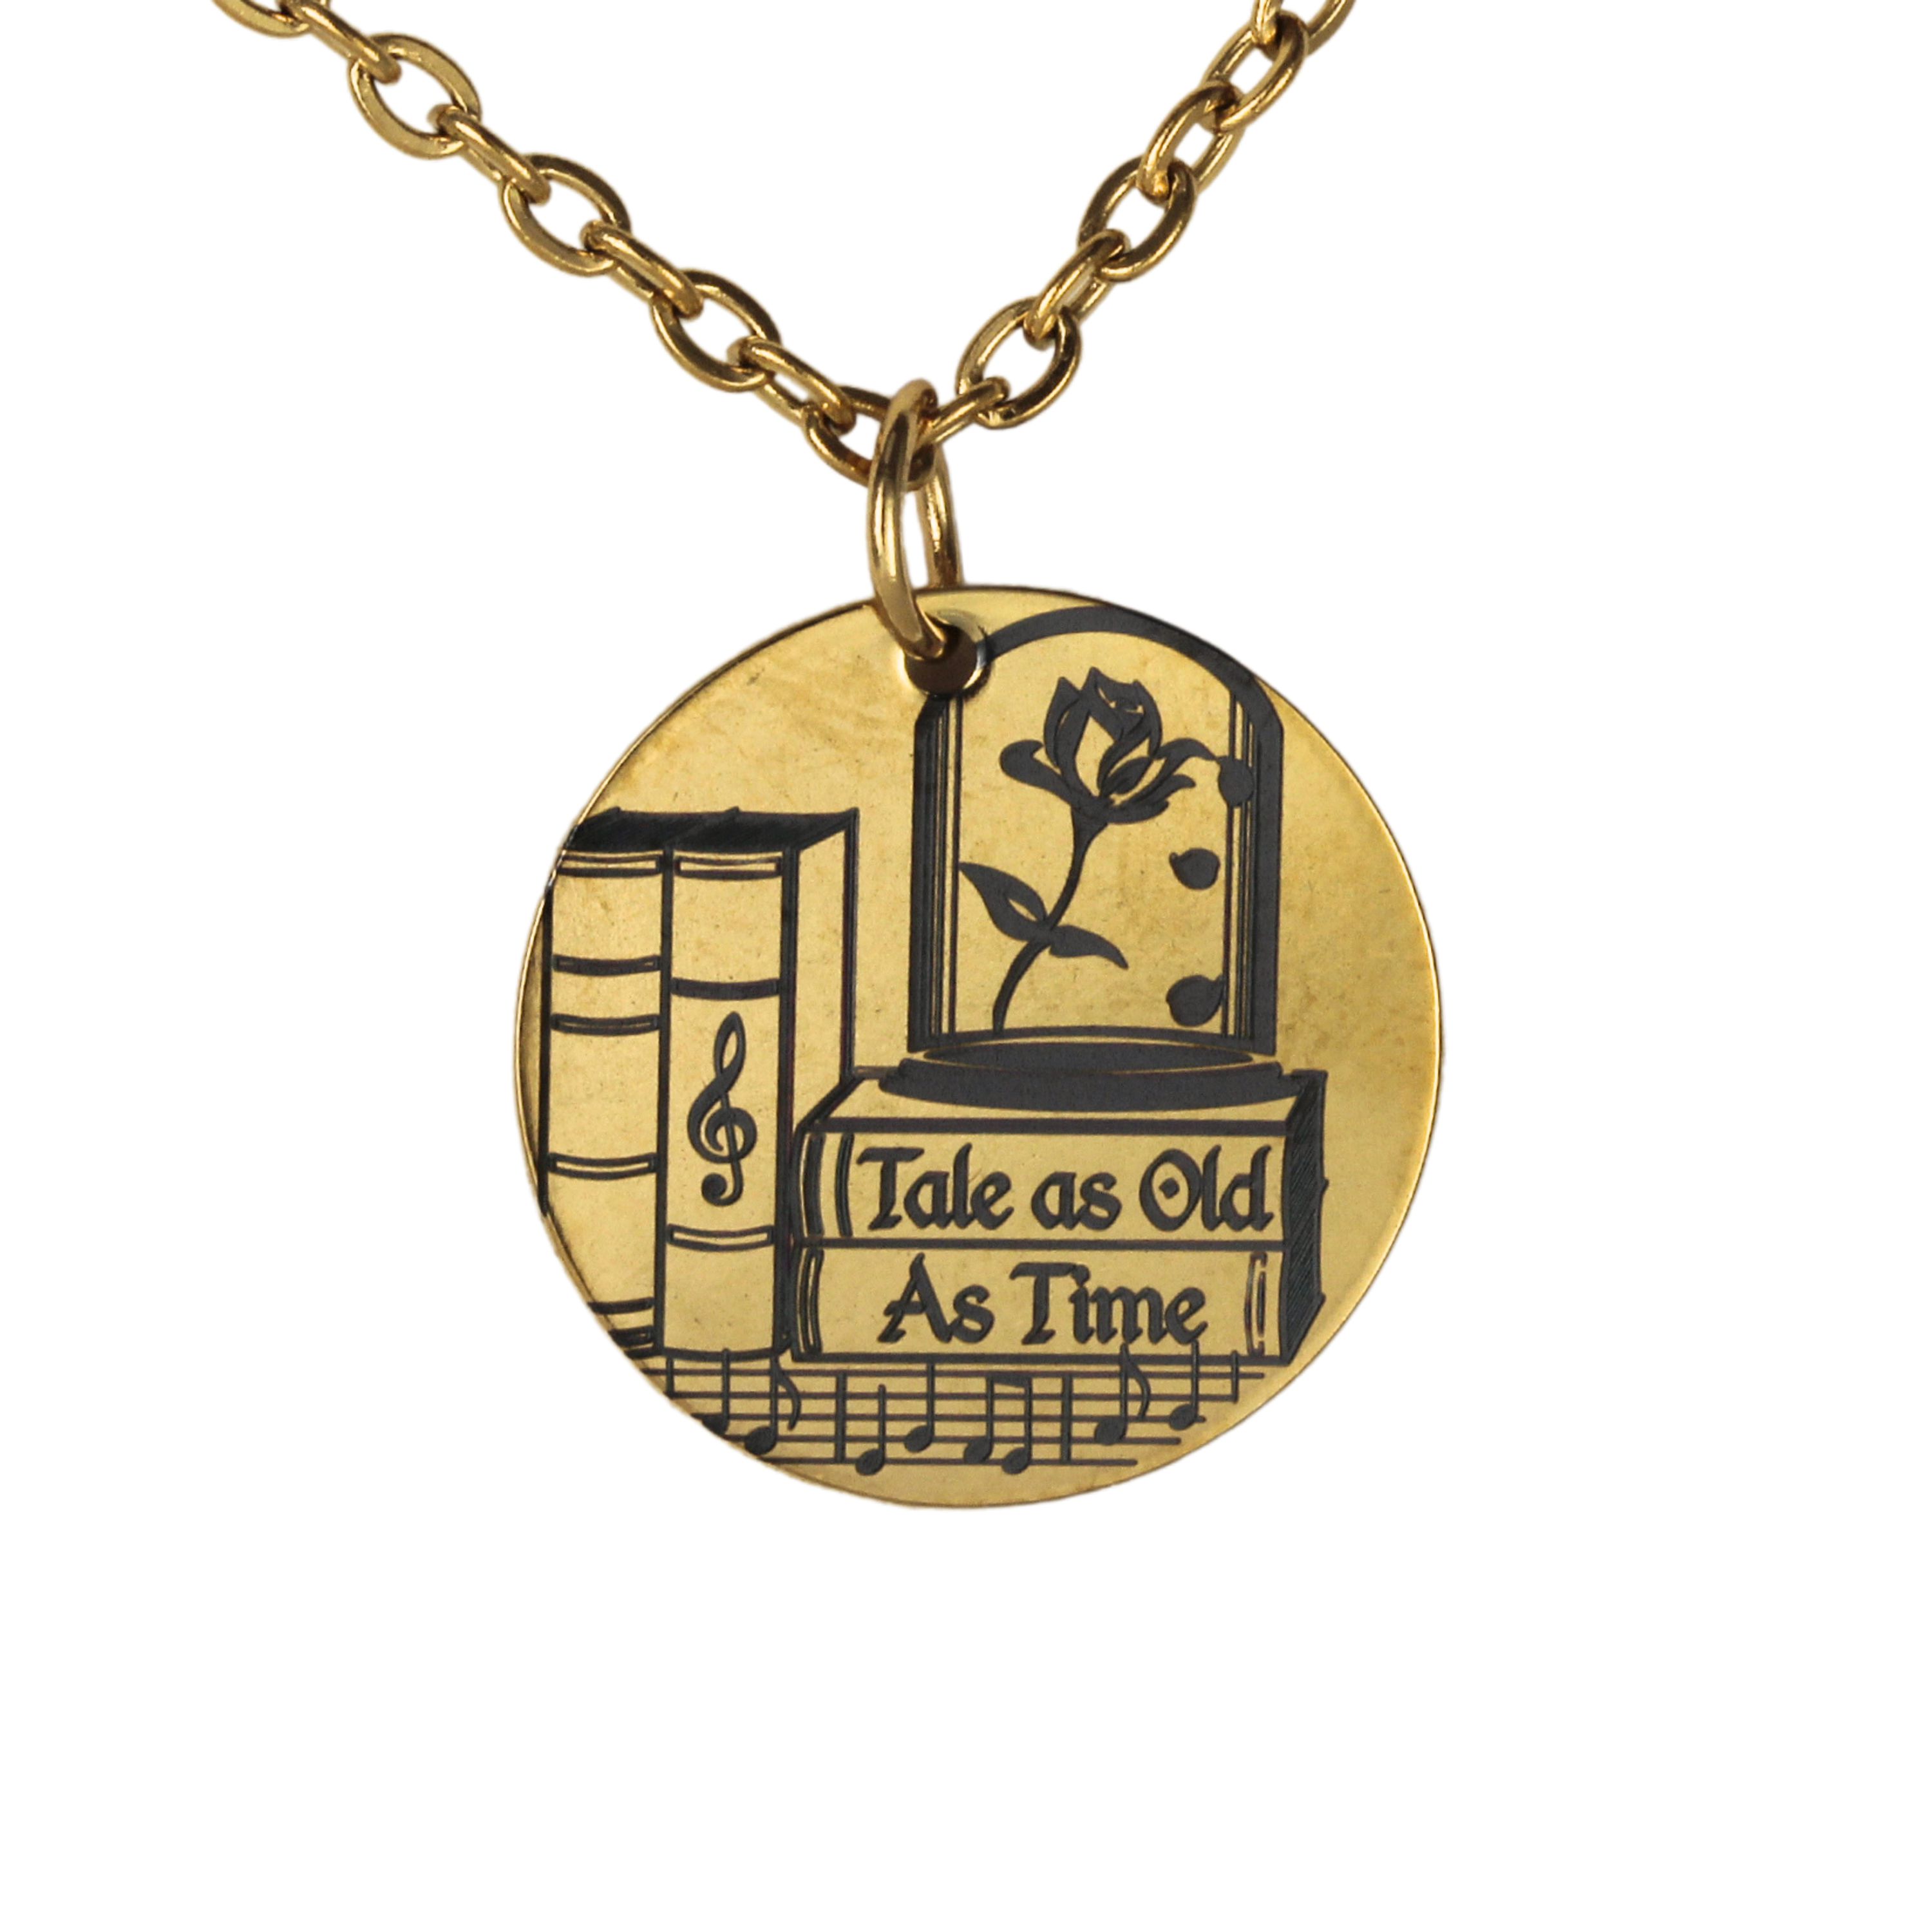 Beauty and the Beast necklace with virtual engraving. Gold plated coin style necklace with black laser engraved design of books on shelf, music notes and a rose in a glass jar.